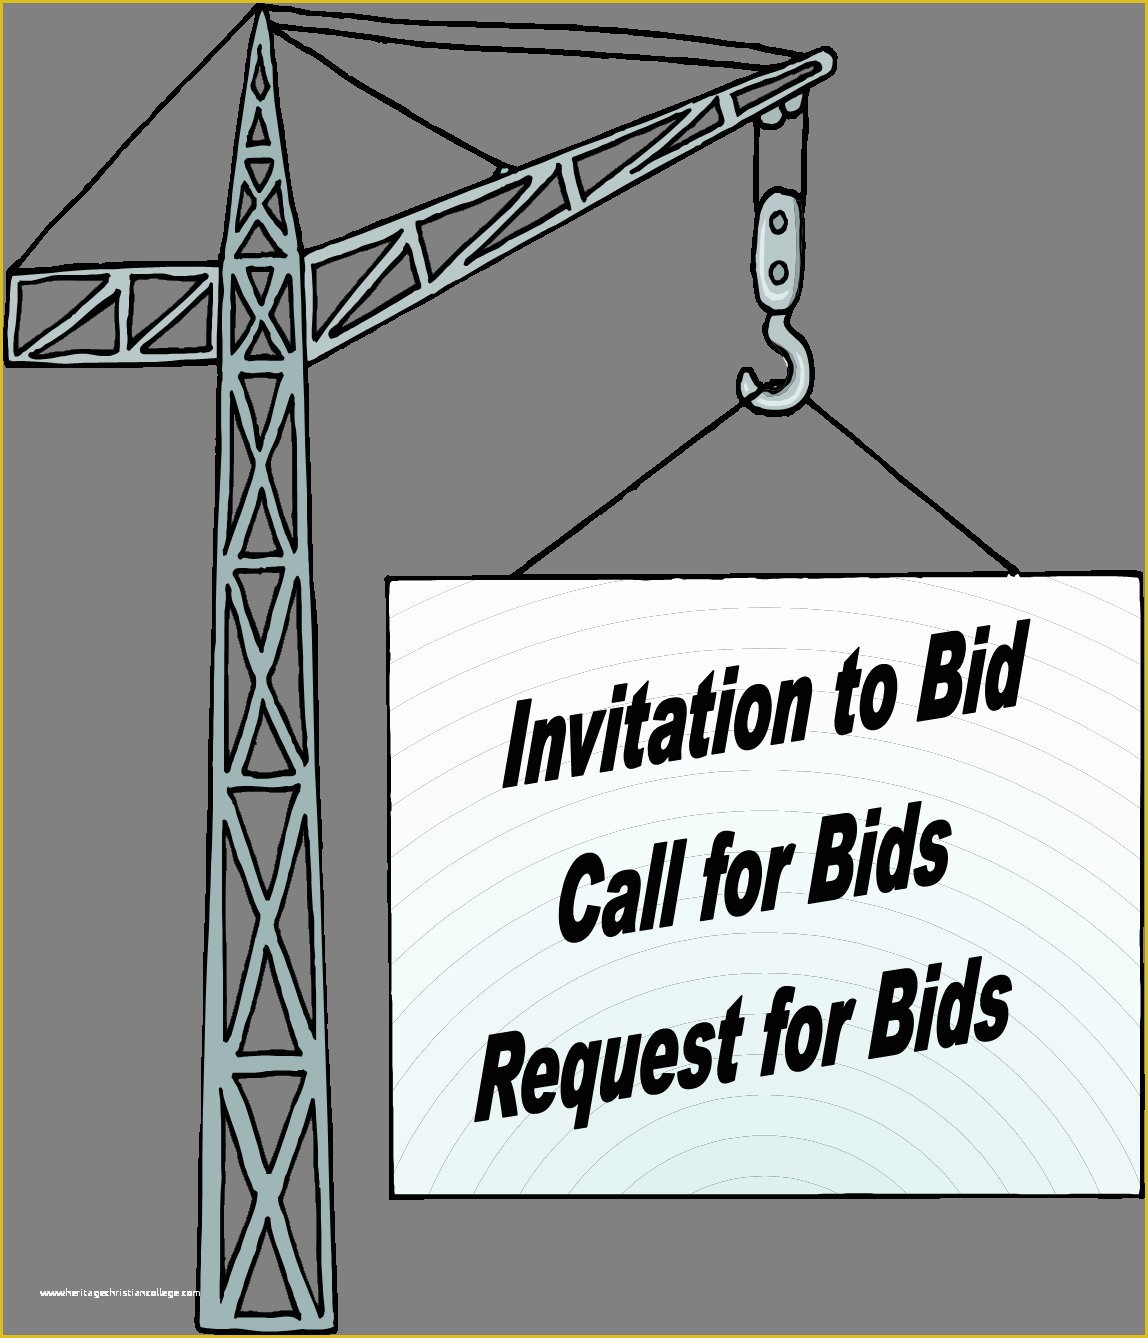 Invitation to Bid Template Free Of Call for Bids